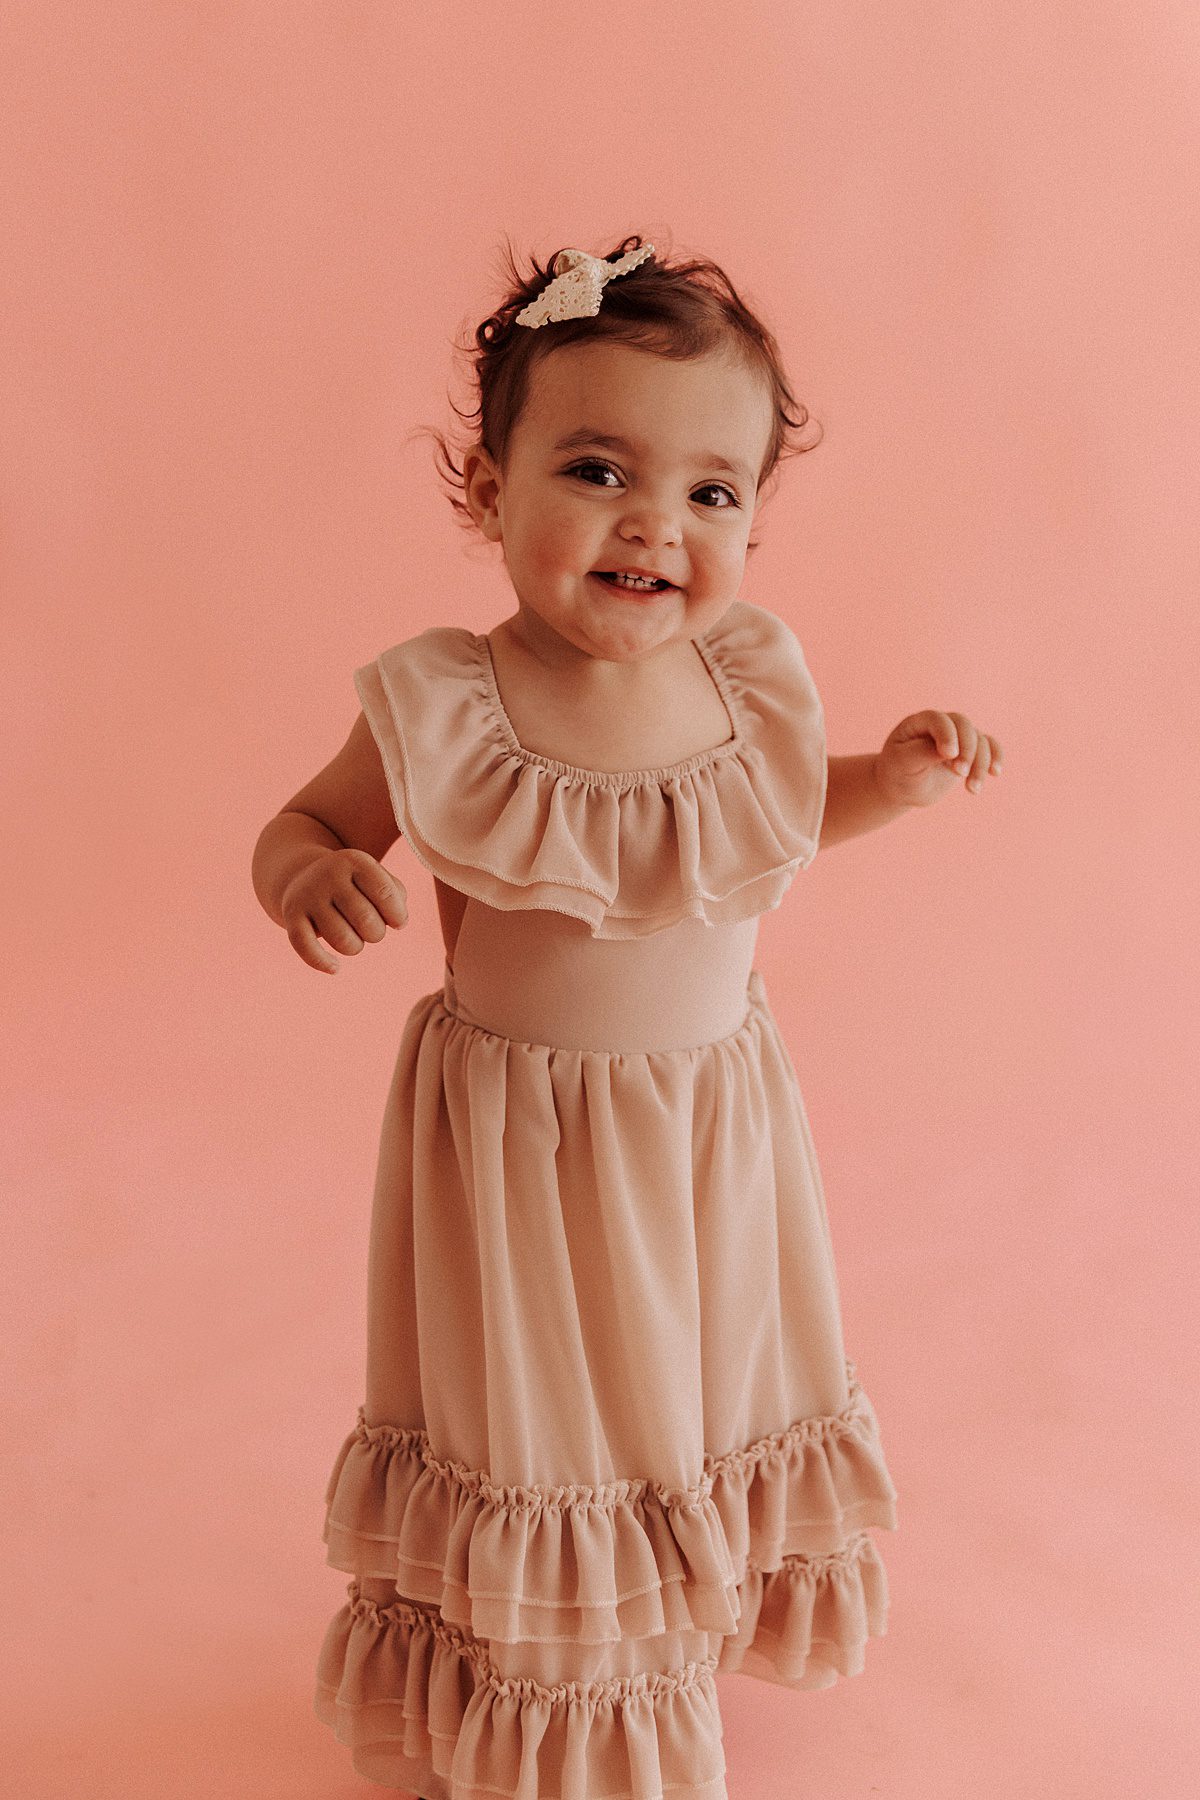 Little girl with dark brown hair and tan dress smiles